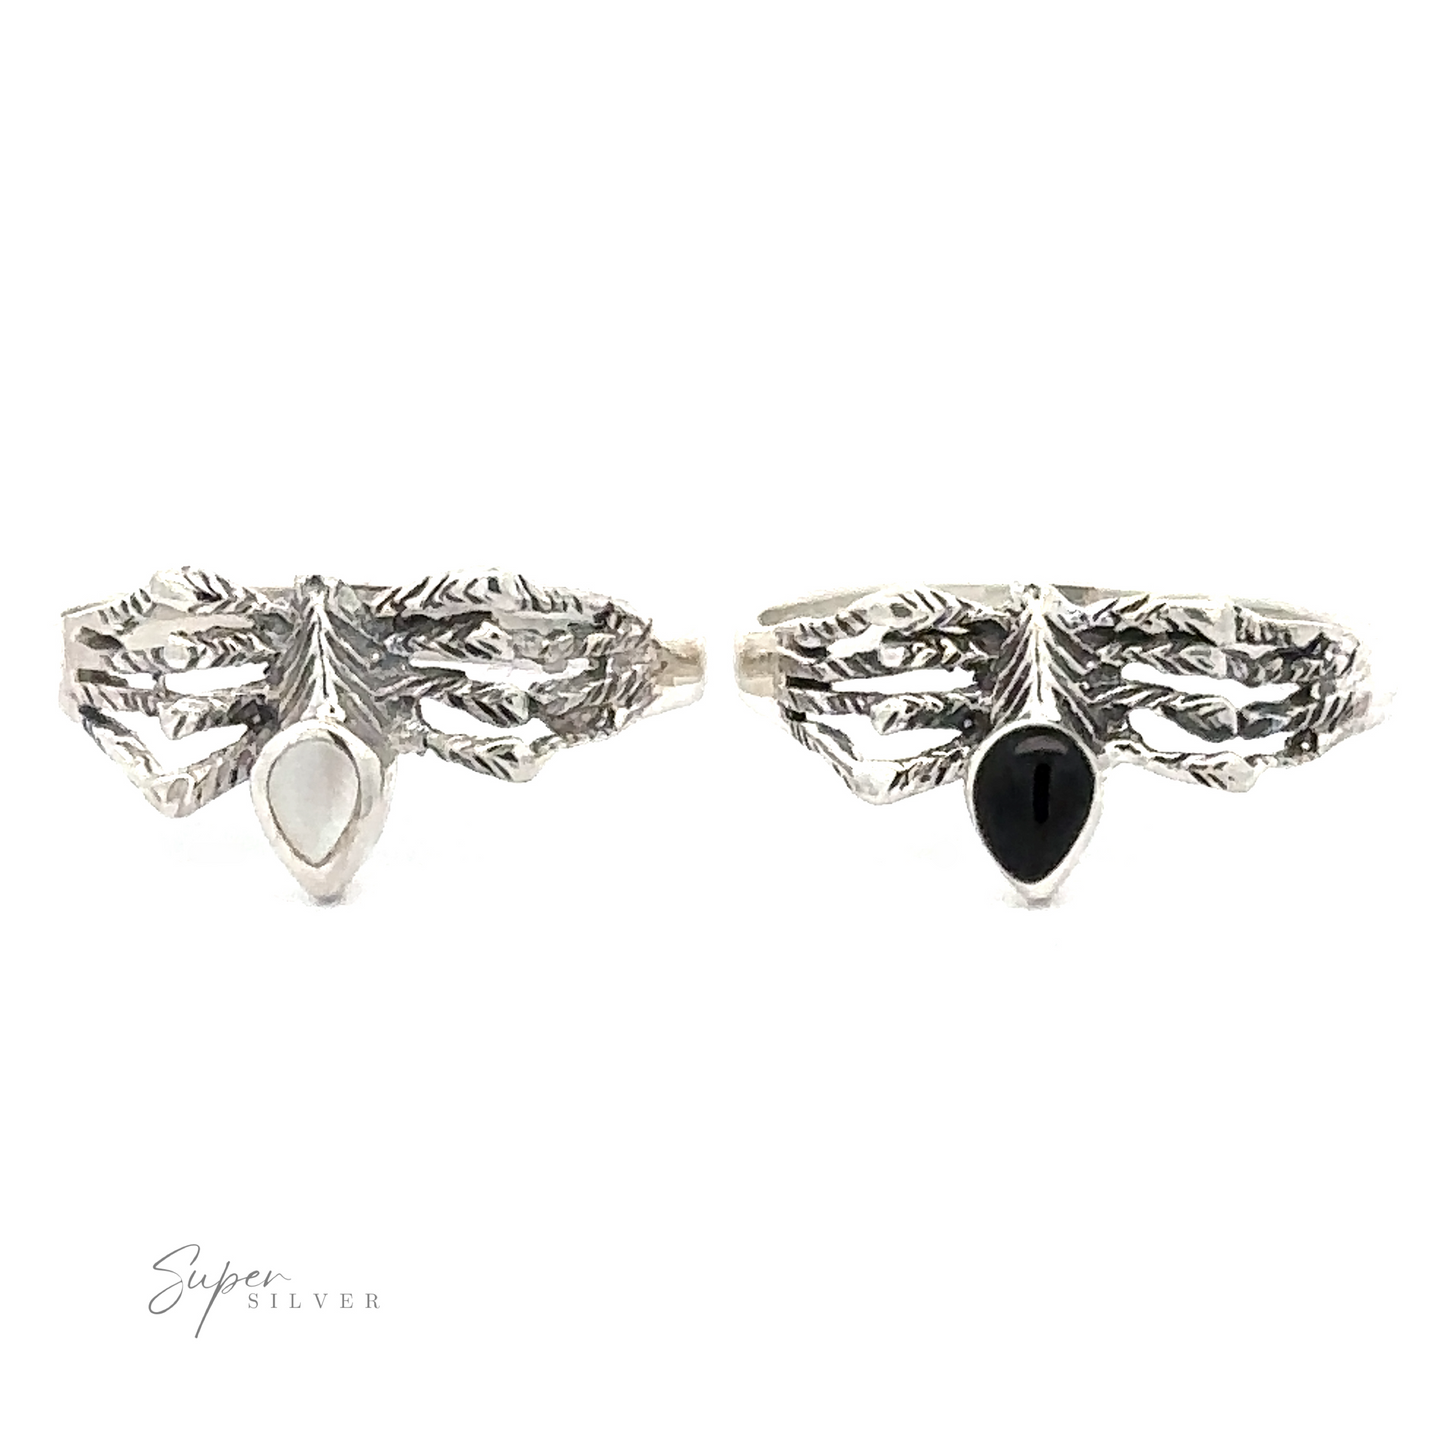 Two Small Inlay Spider Rings: one with a white stone, the other with a black stone. The text "Super Silver" is visible in the bottom left corner, giving this mystical jewelry set an enchanting touch.